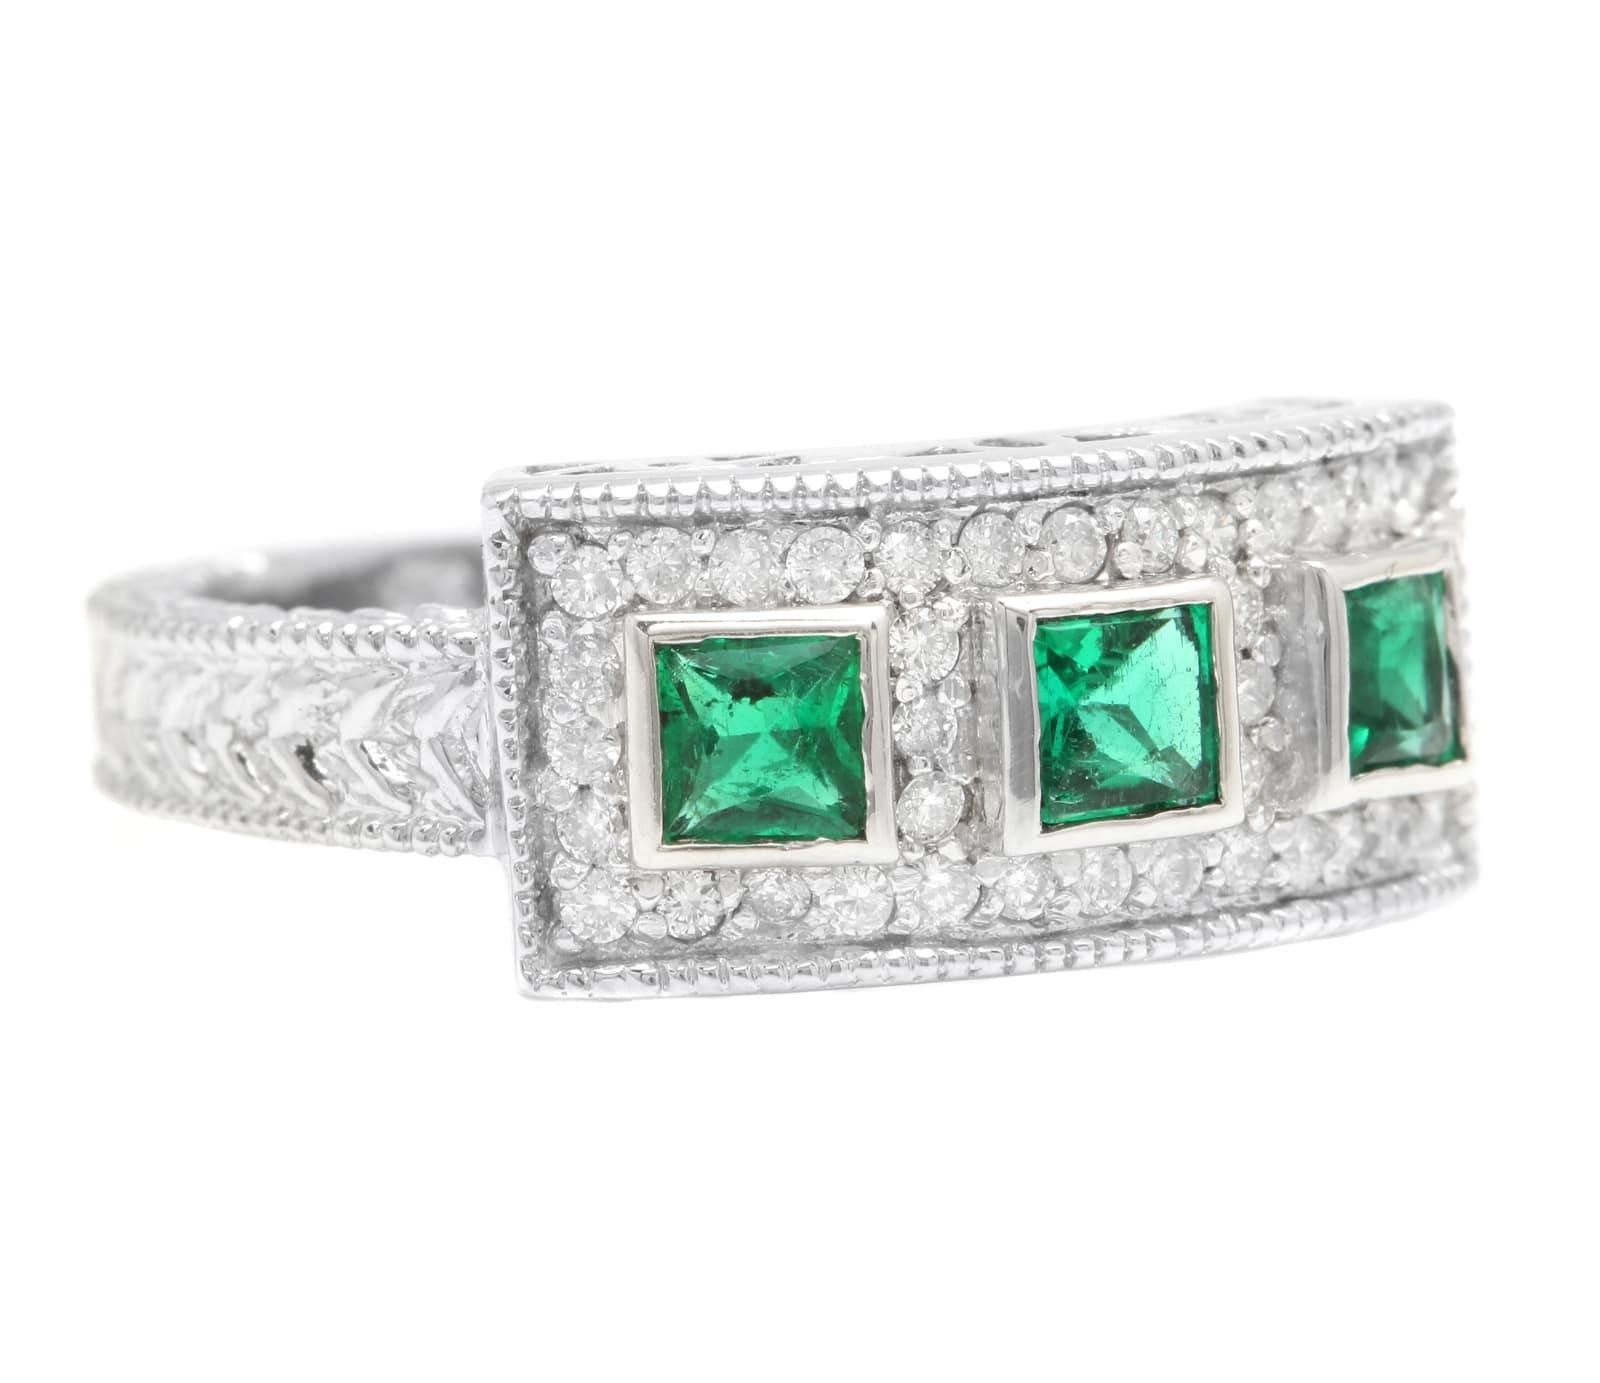 0.75 Carats Natural Emerald and Diamond 14K Solid White Gold Ring

Suggested Replacement Value: $5,500.00

Total Natural Green Emeralds Weight is: Approx. 0.50 Carats (High Quality) 

Emerald Measures: Approx. 4.00mm x 4.00mm

Natural Round Diamonds